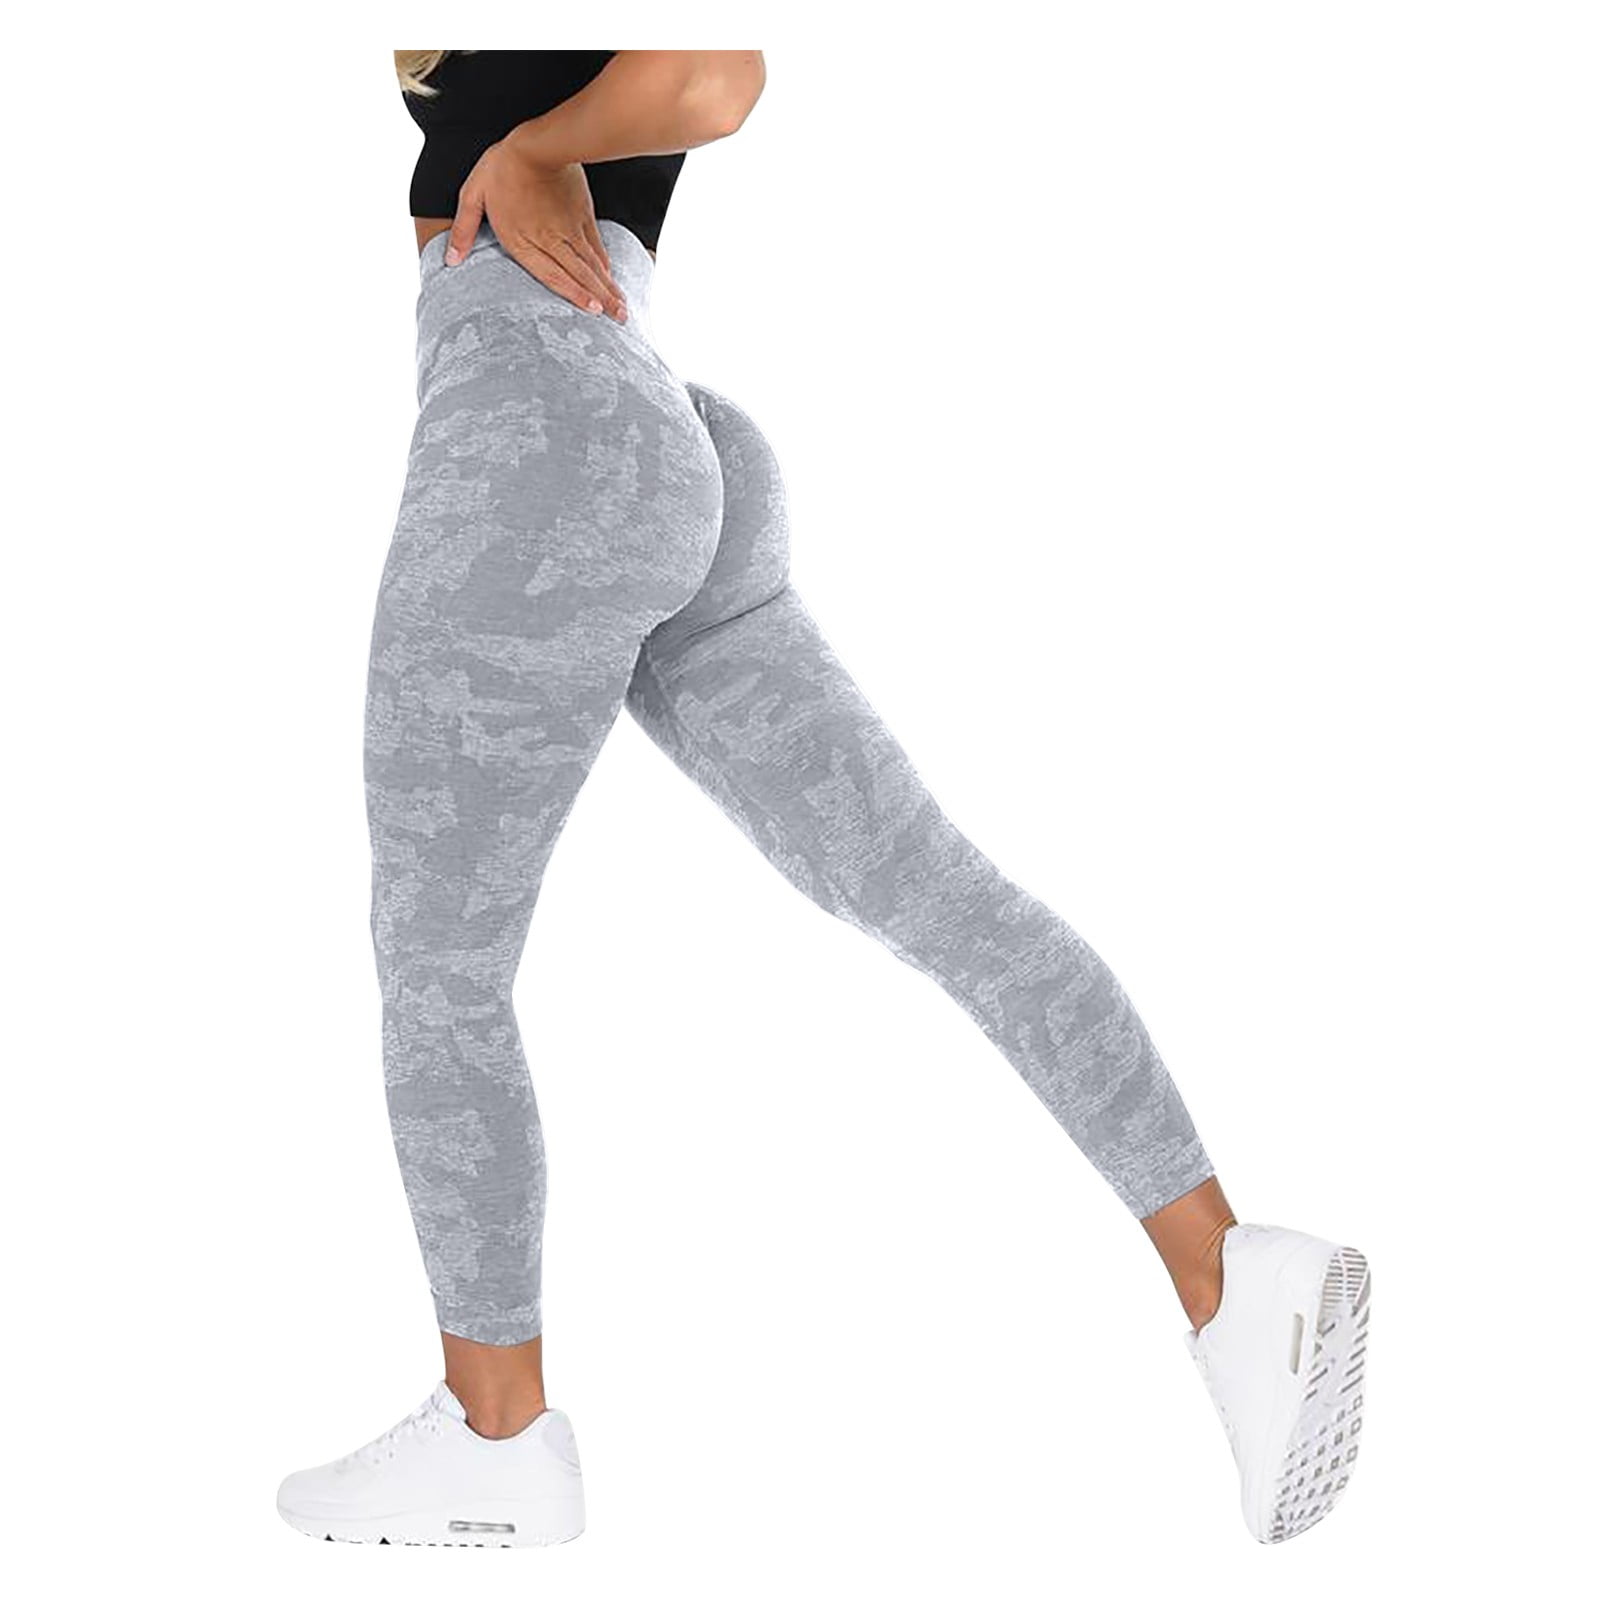 KaLI_store Yoga Pants with Pockets for Women High Waisted Leggings